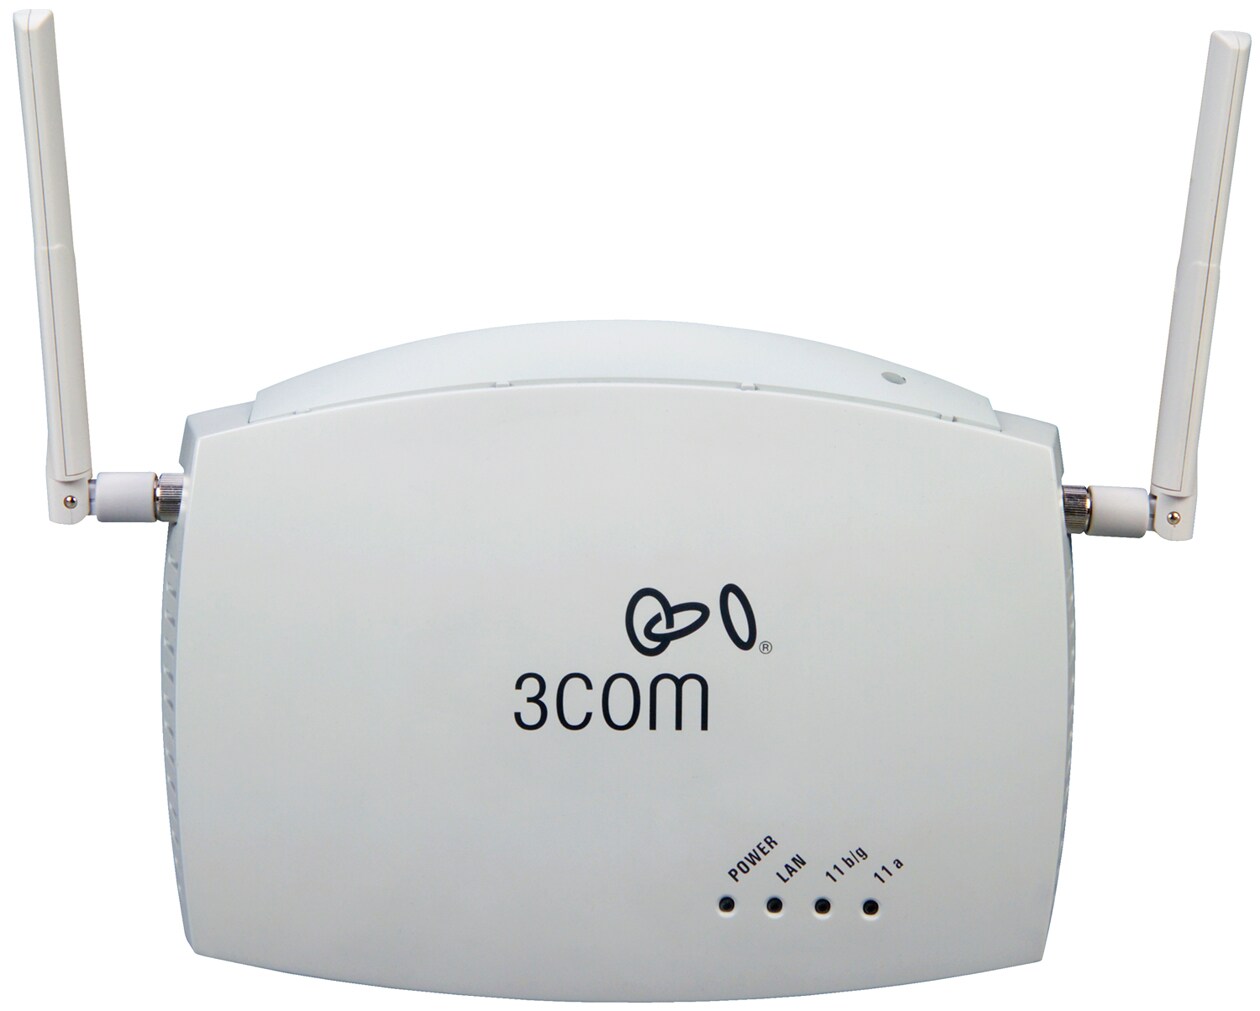 3Com AirProtect Sentry 5850 Wireless Intrusion Prevention System